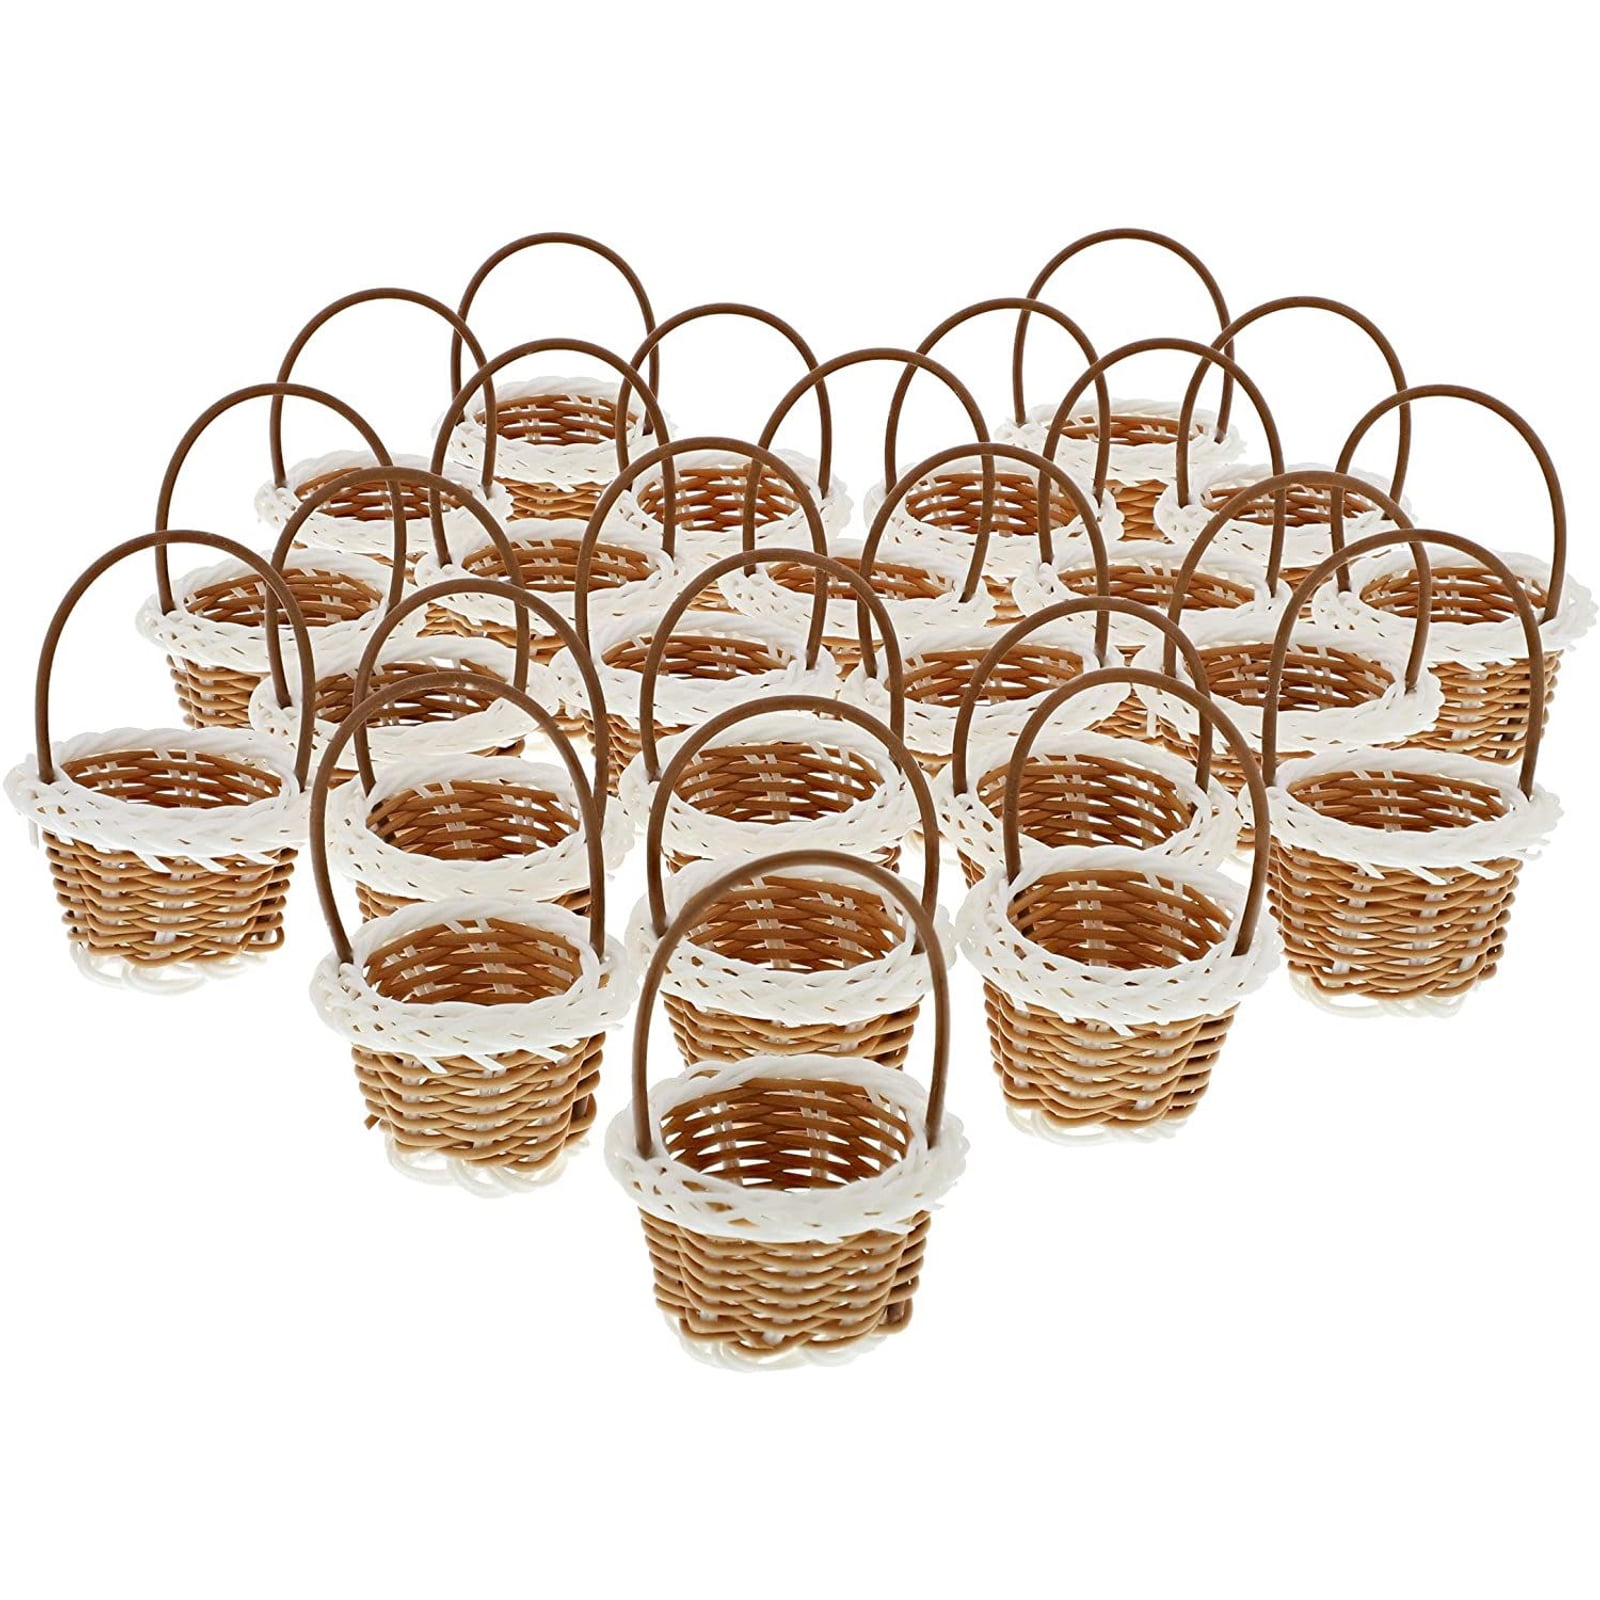 24 CREAM RUSTIC BASKETS HAMPERS GIFTS BULBS PLANTS FLORIST LINED 2 sizes 